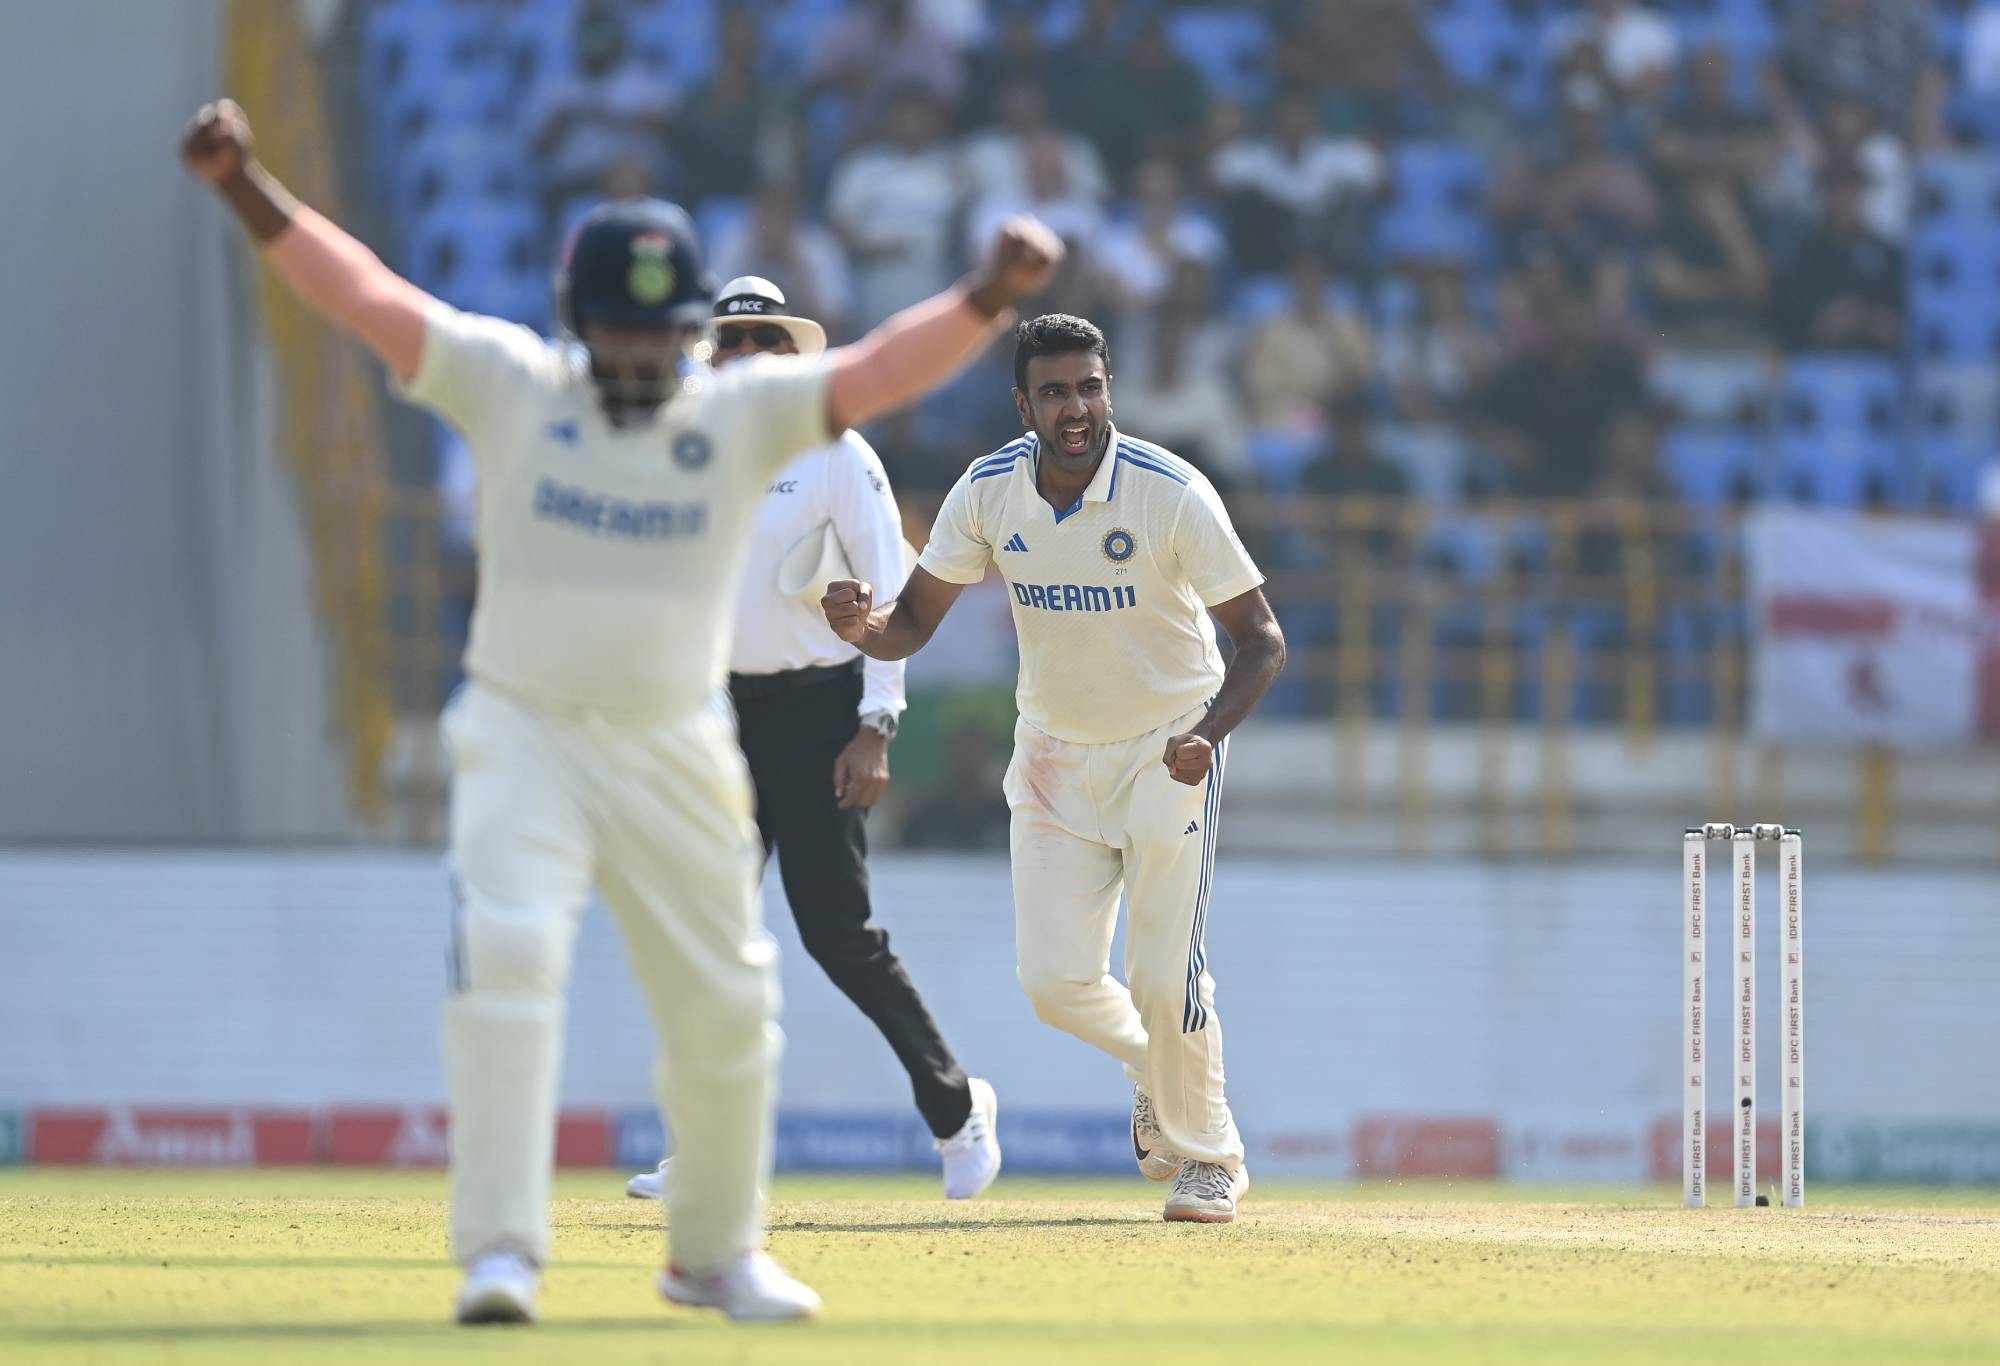 RAJKOT, INDIA - FEBRUARY 16: India bowler Ravi Ashwin celebrates after taking the wicket of Zak Crawley to reach his 500th Test Wicket during day two of the 3rd Test Match between India and England at Saurashtra Cricket Association Stadium on February 16, 2024 in Rajkot, India. (Photo by Gareth Copley/Getty Images)